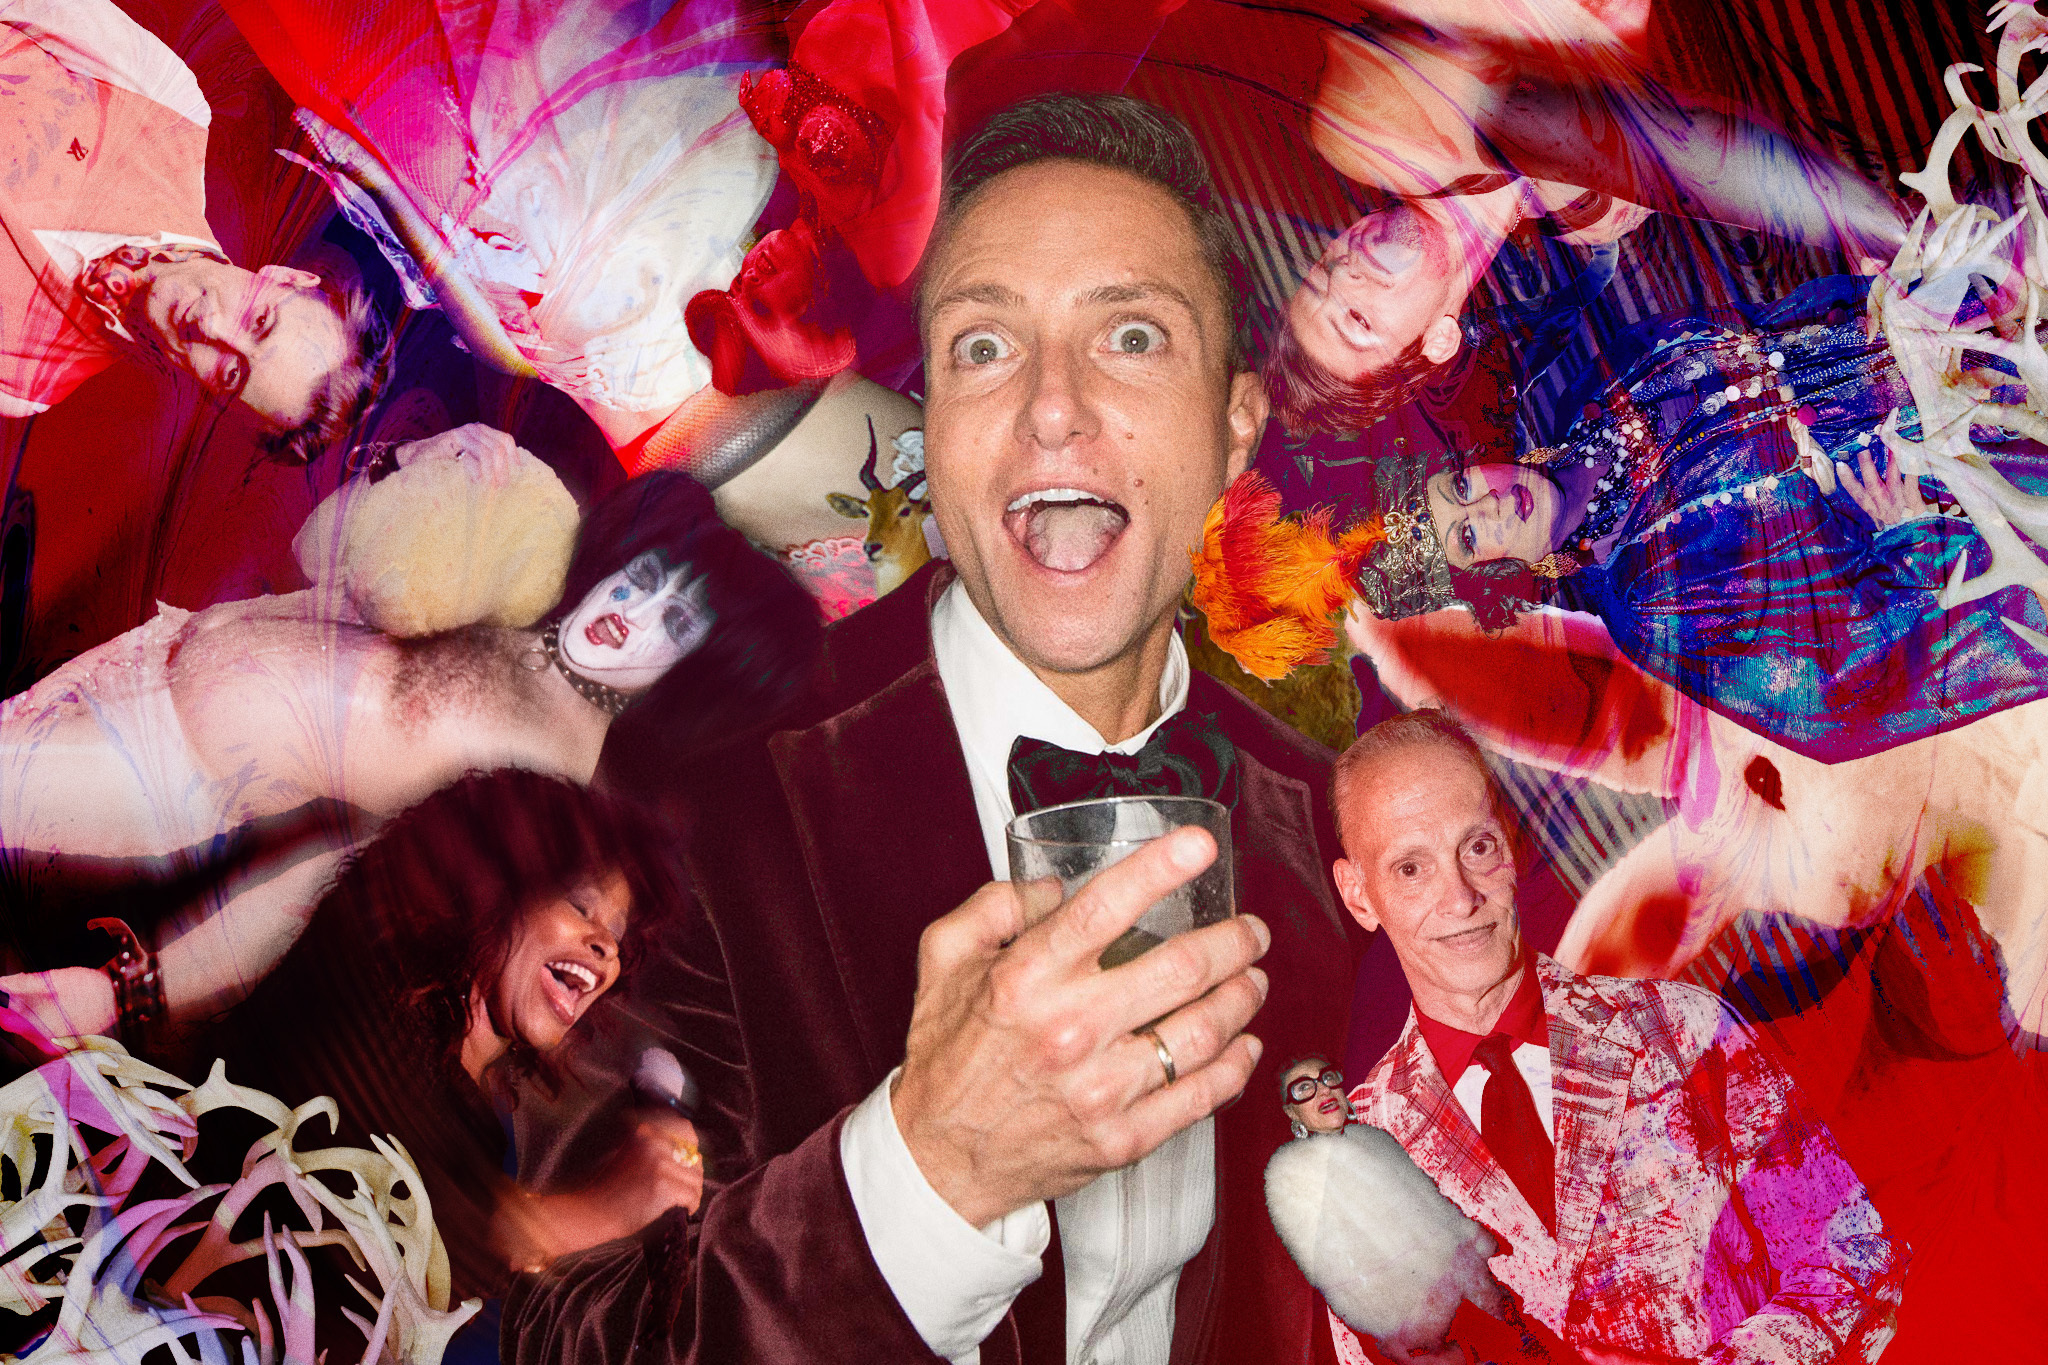 A man in a velvet tuxedo holds a drink, surrounded by eccentric, colorful, and surreal imagery, including performers, costumes, and overlapping faces in vibrant hues.